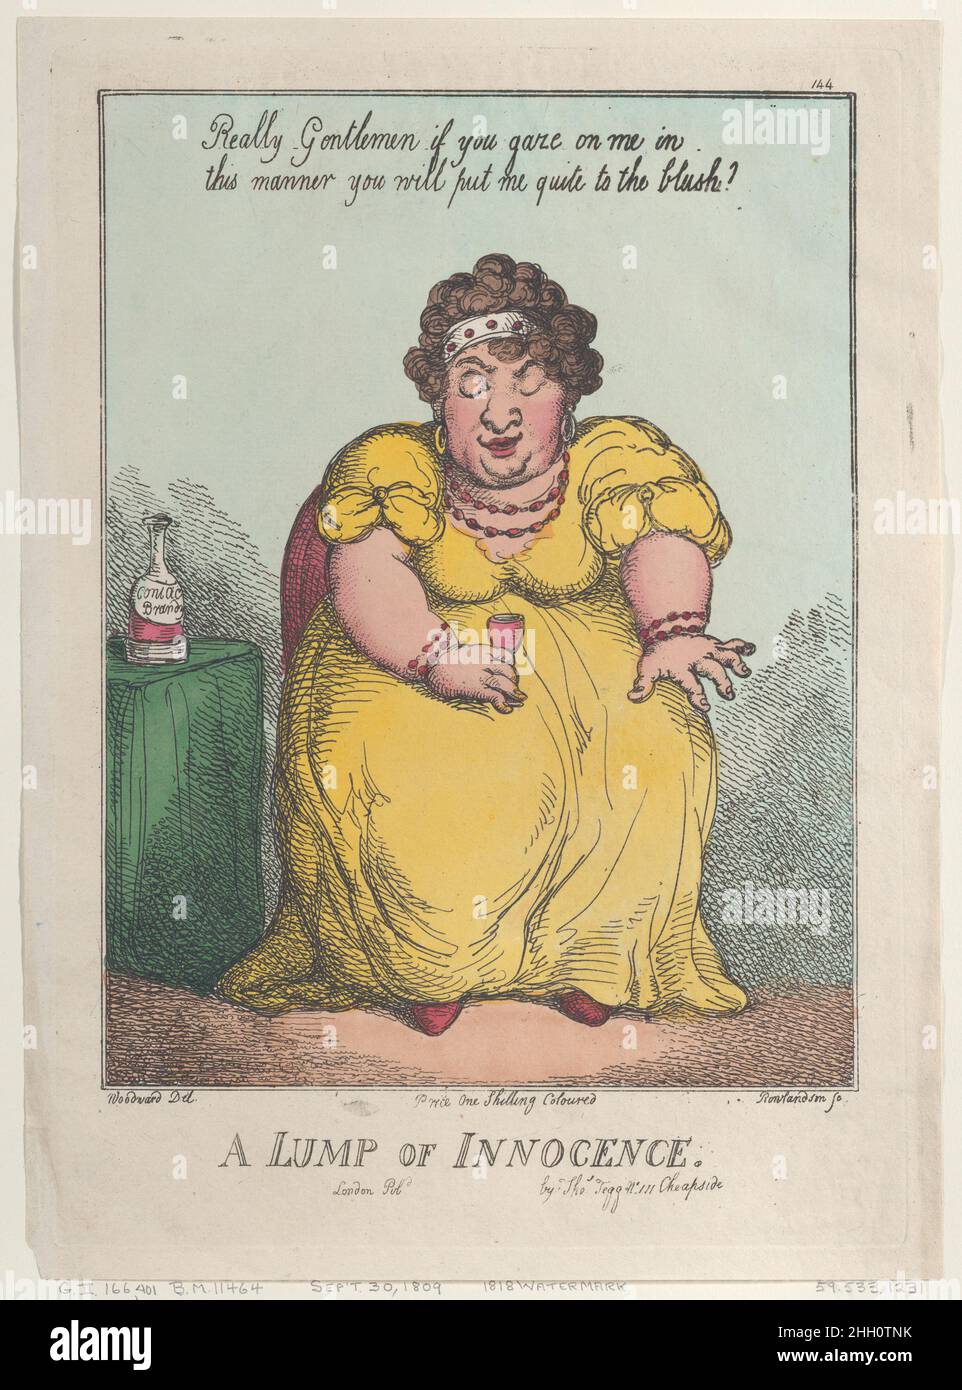 A Lump of Innocence [September 30, 1809], reprint Thomas Rowlandson A plump woman seated holding a glass of cognac, with the bottle on the table at left. Above her is inscribed 'Really Gentlemen if you gaze on me in this manner you will put me quite to the blush!'. A Lump of Innocence. Thomas Rowlandson (British, London 1757–1827 London). [September 30, 1809], reprint. Hand-colored etching. Thomas Tegg (British, 1776–1846). Prints Stock Photo